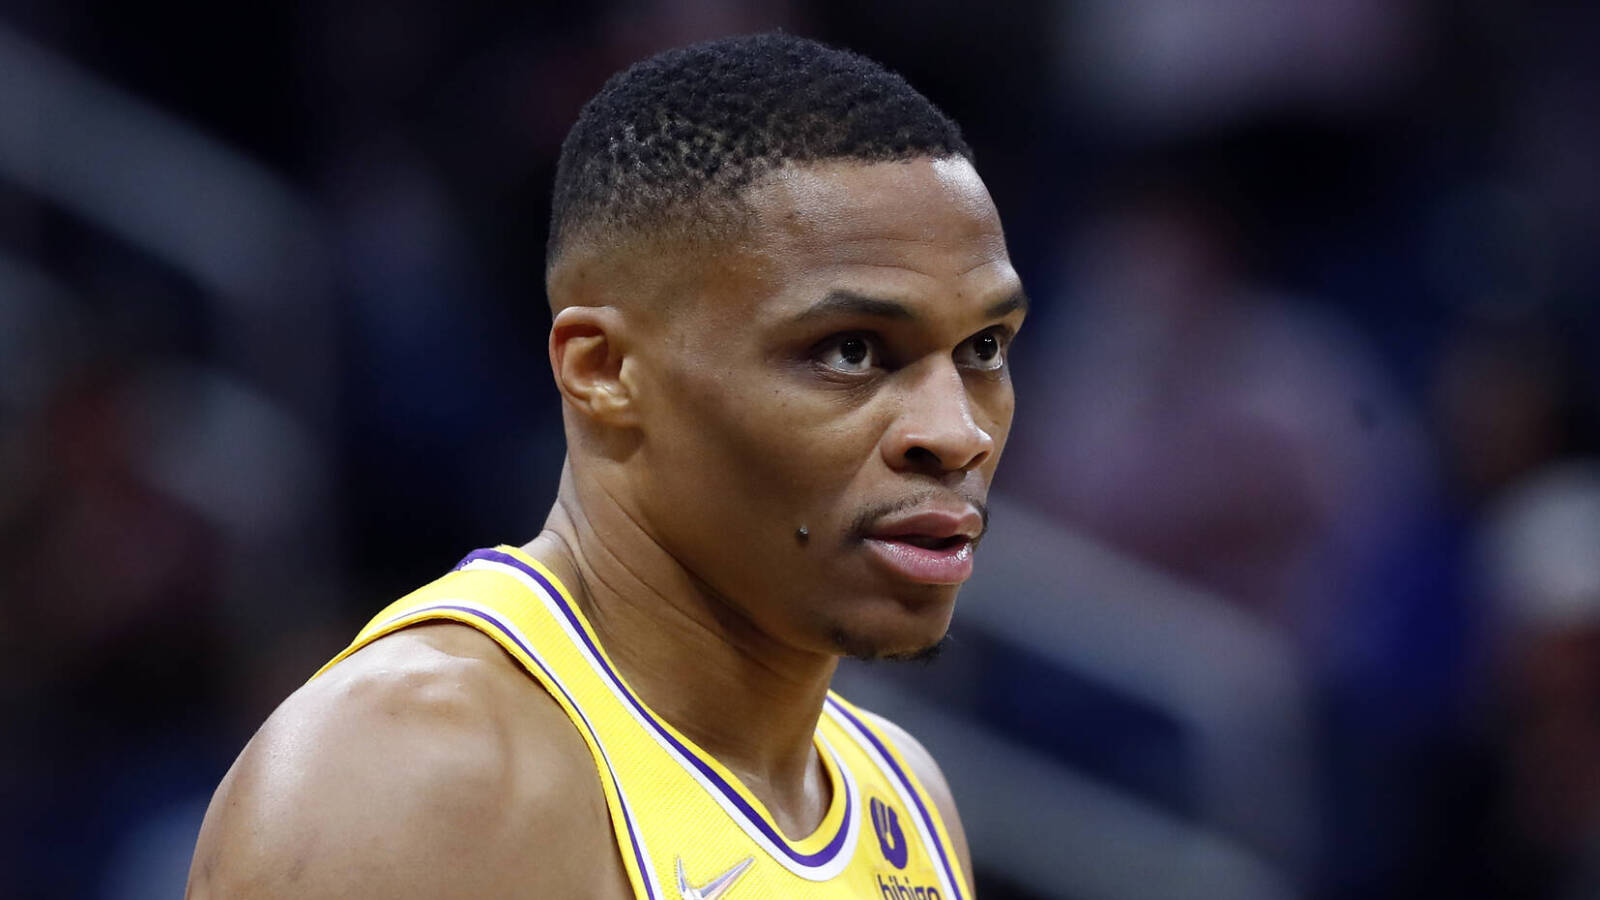 NBA Today agrees Russell Westbrook's 2K rating should be higher 